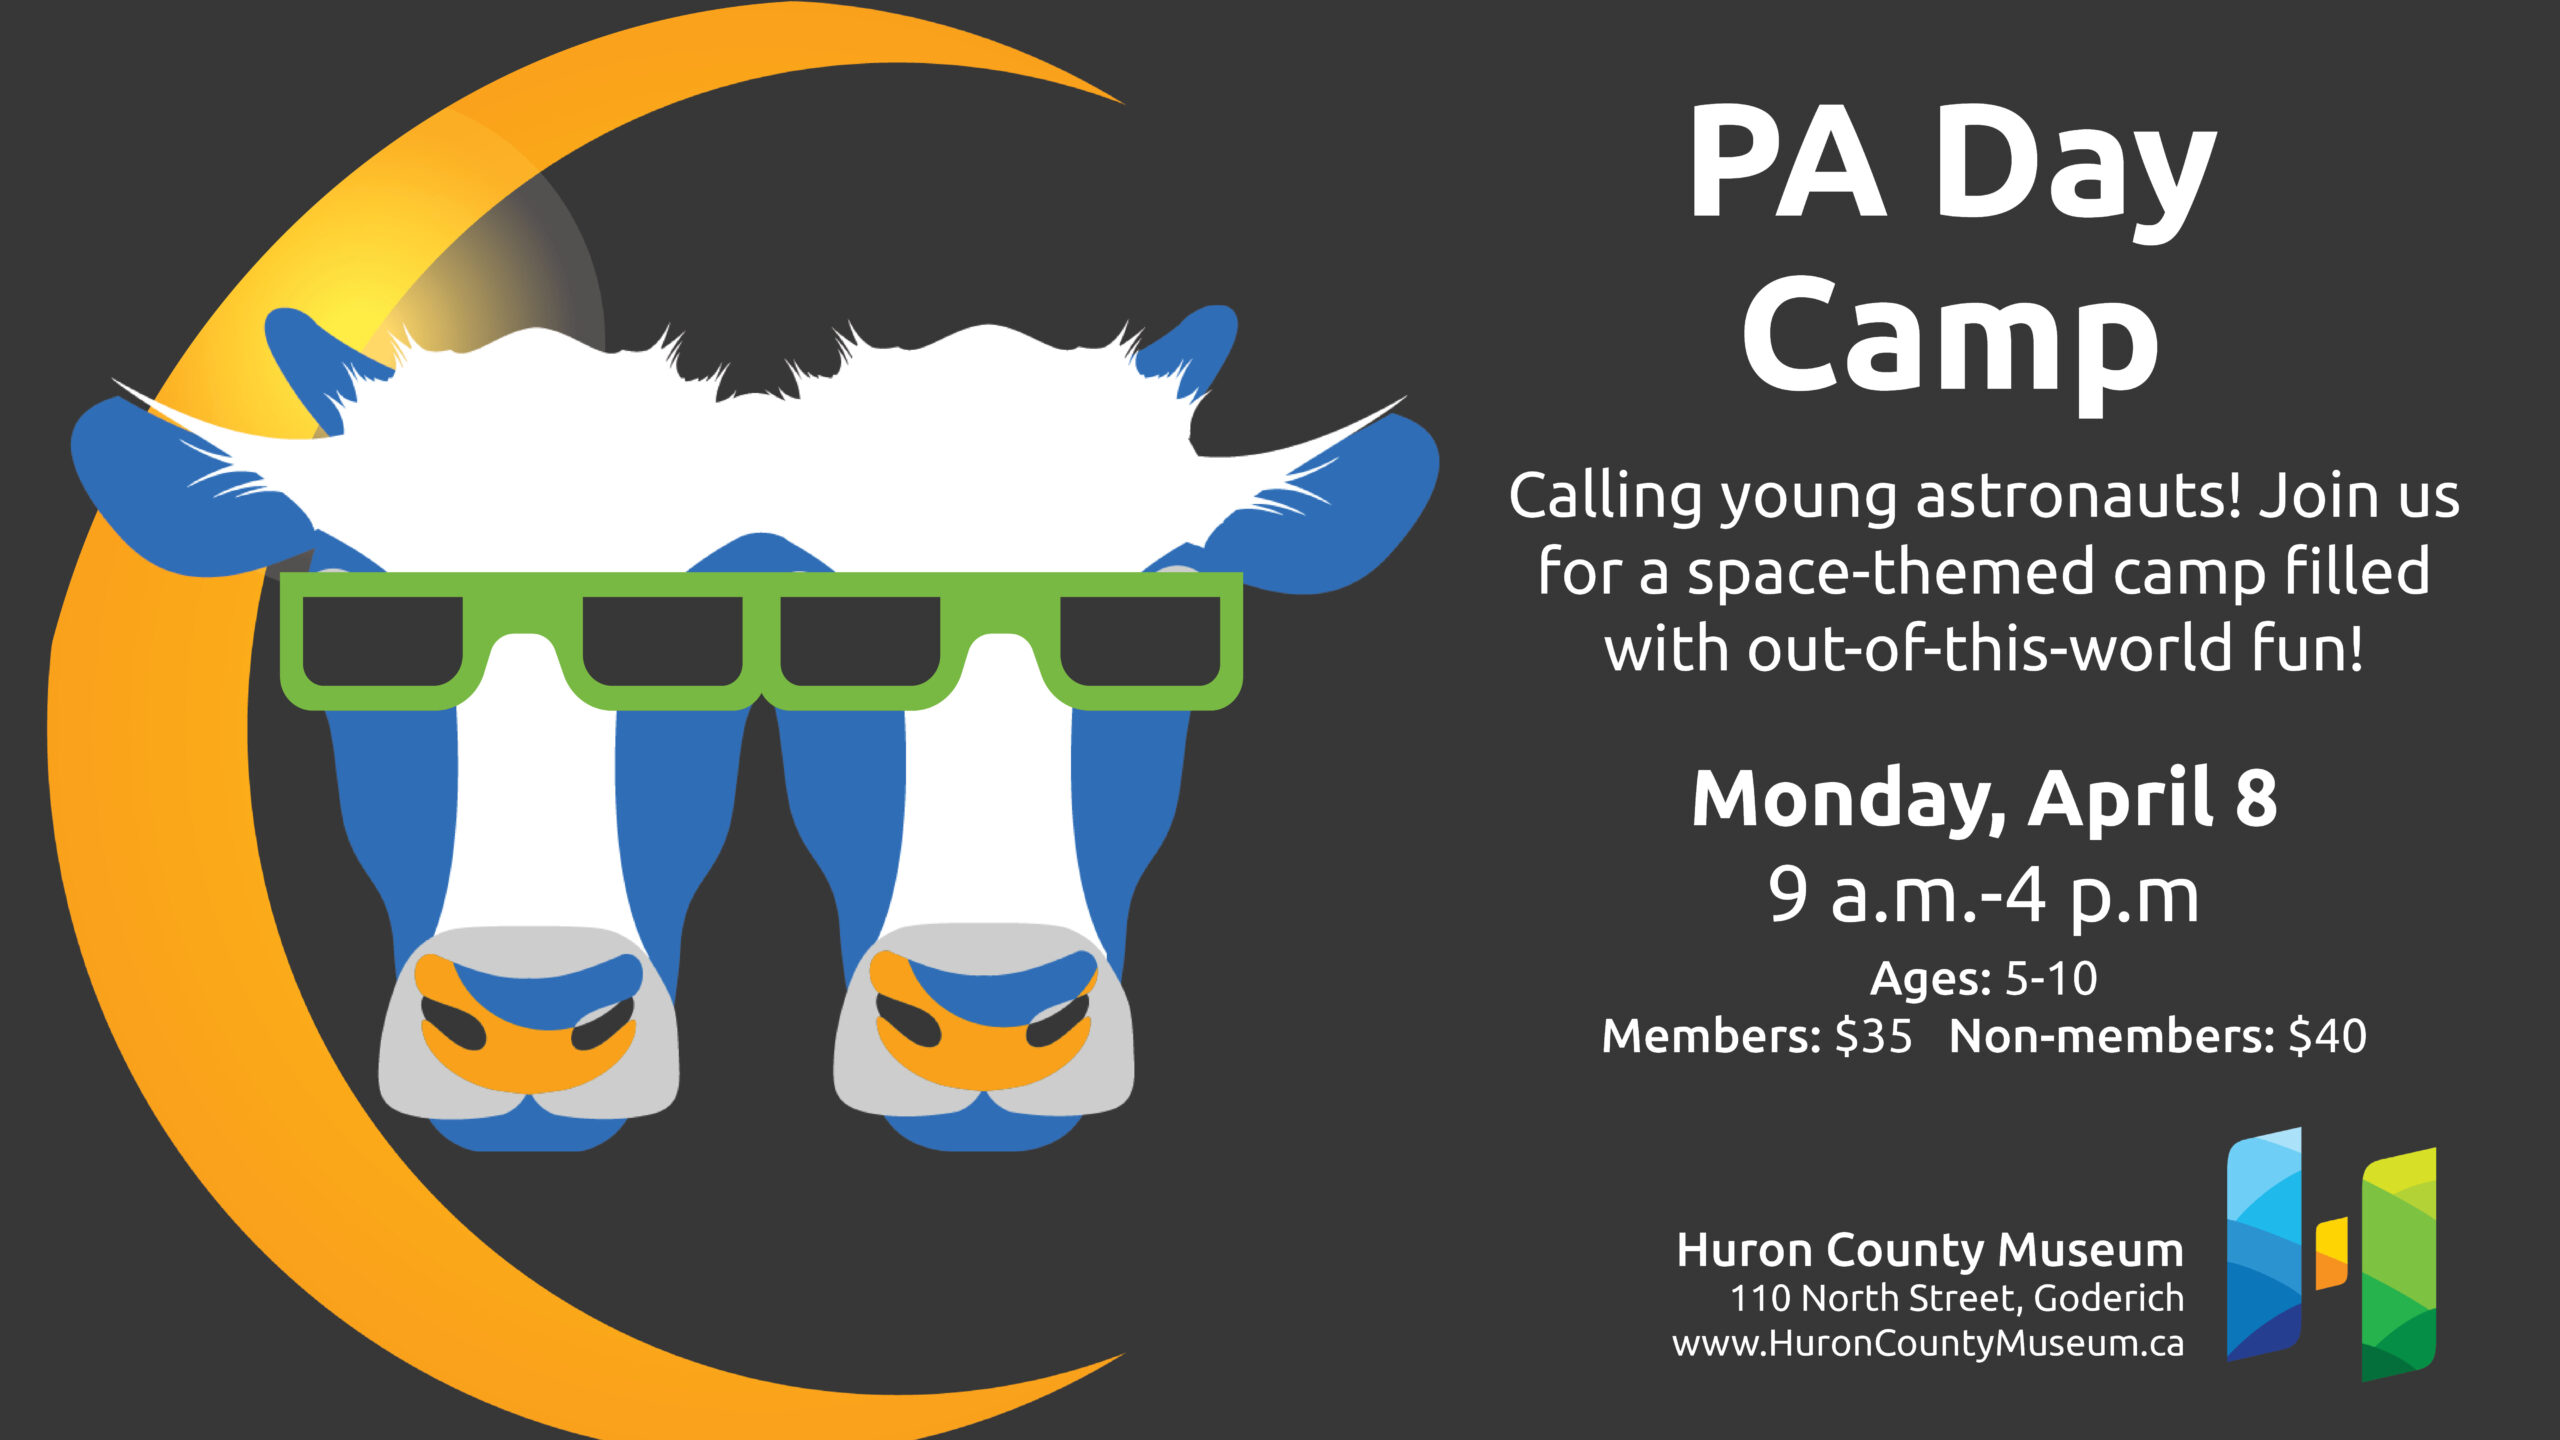 Illustration of a two-headed calf wearing eclipse glasses with solar eclipse behind them. Text promoted PA Day camp at the museum